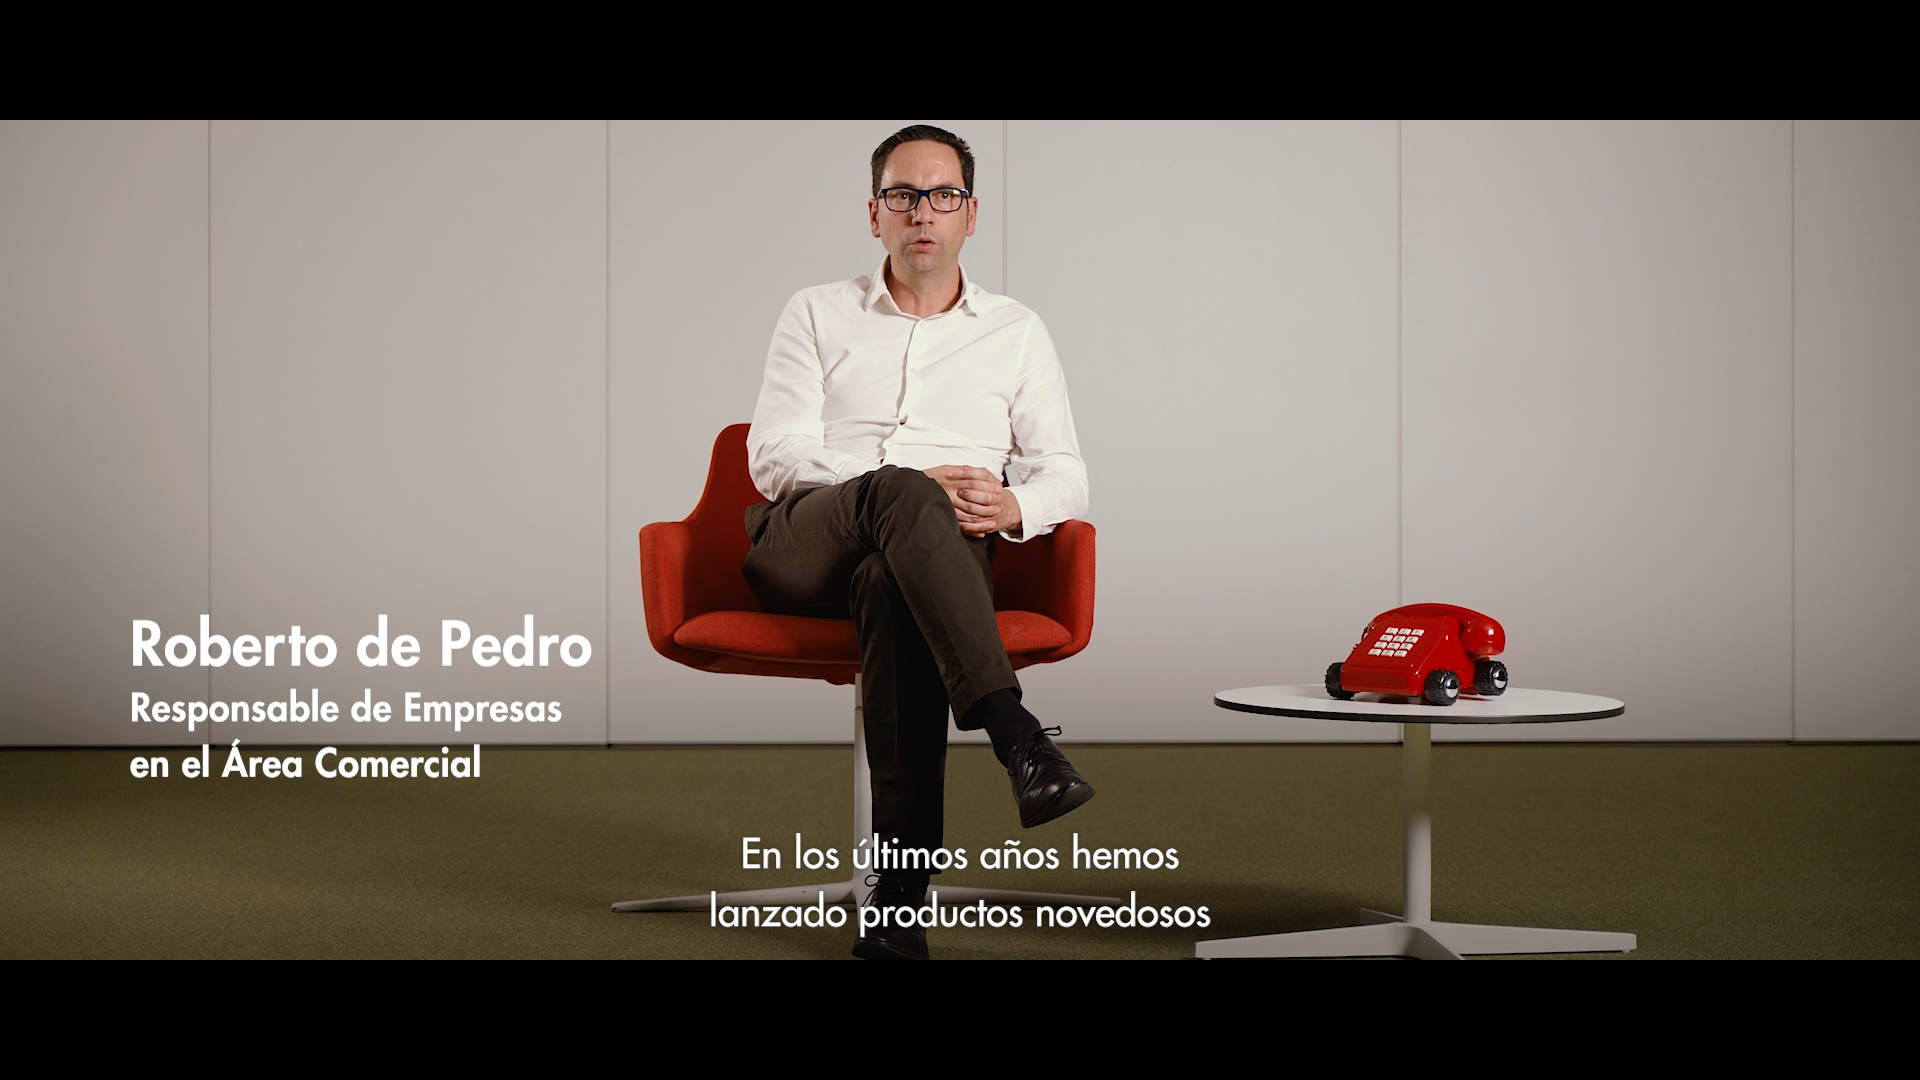 Roberto de Pedro, Business Manager in the Commercial Area